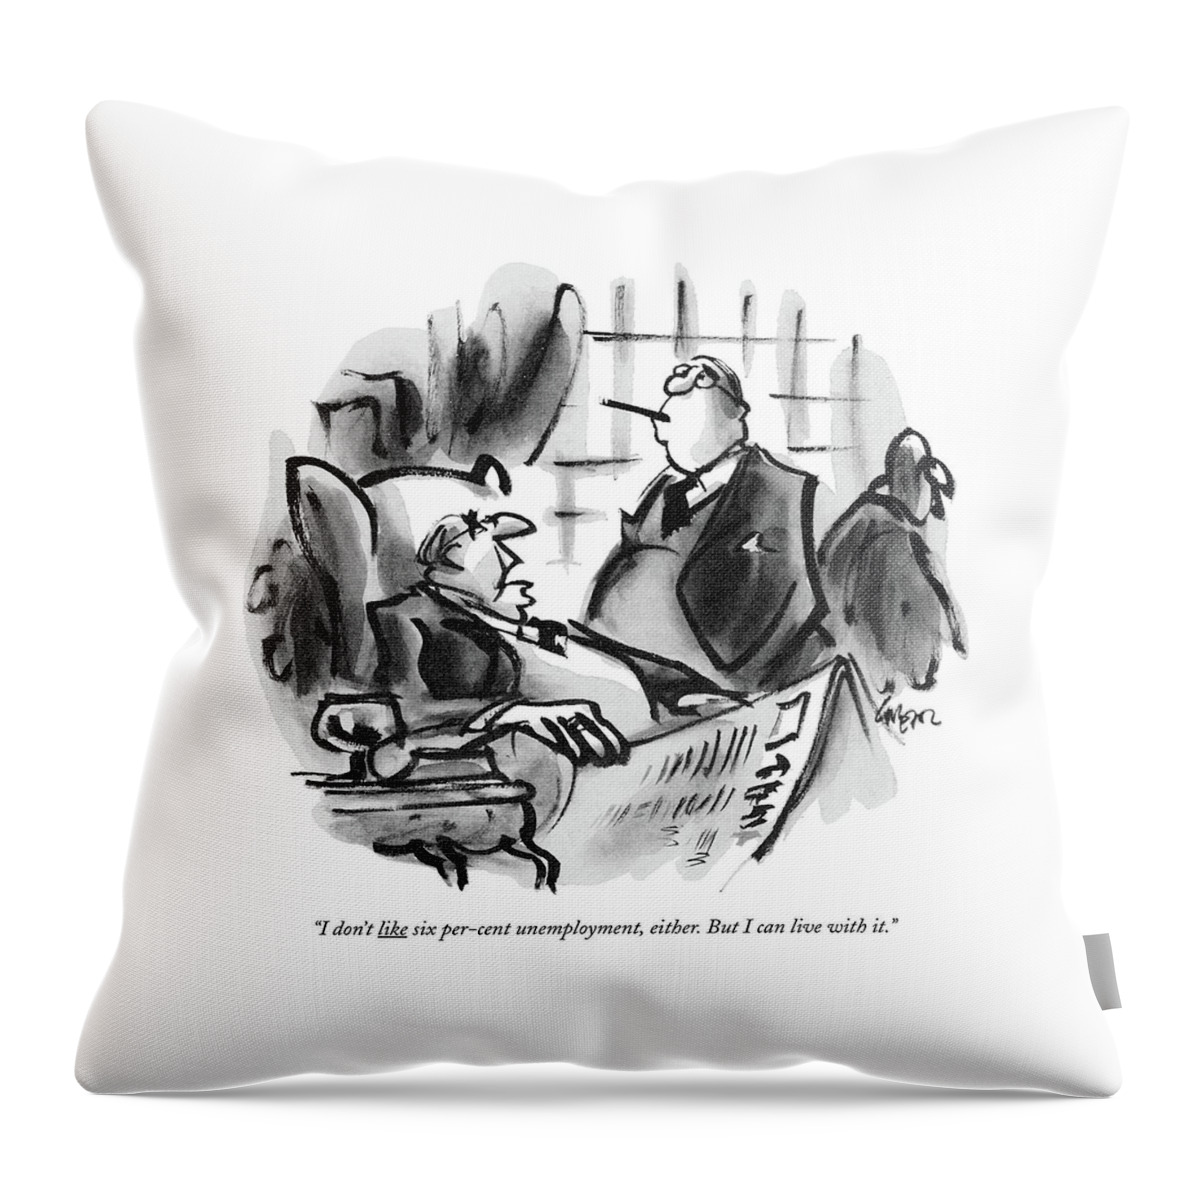 I Don't Like Six Per-cent Unemployment Throw Pillow